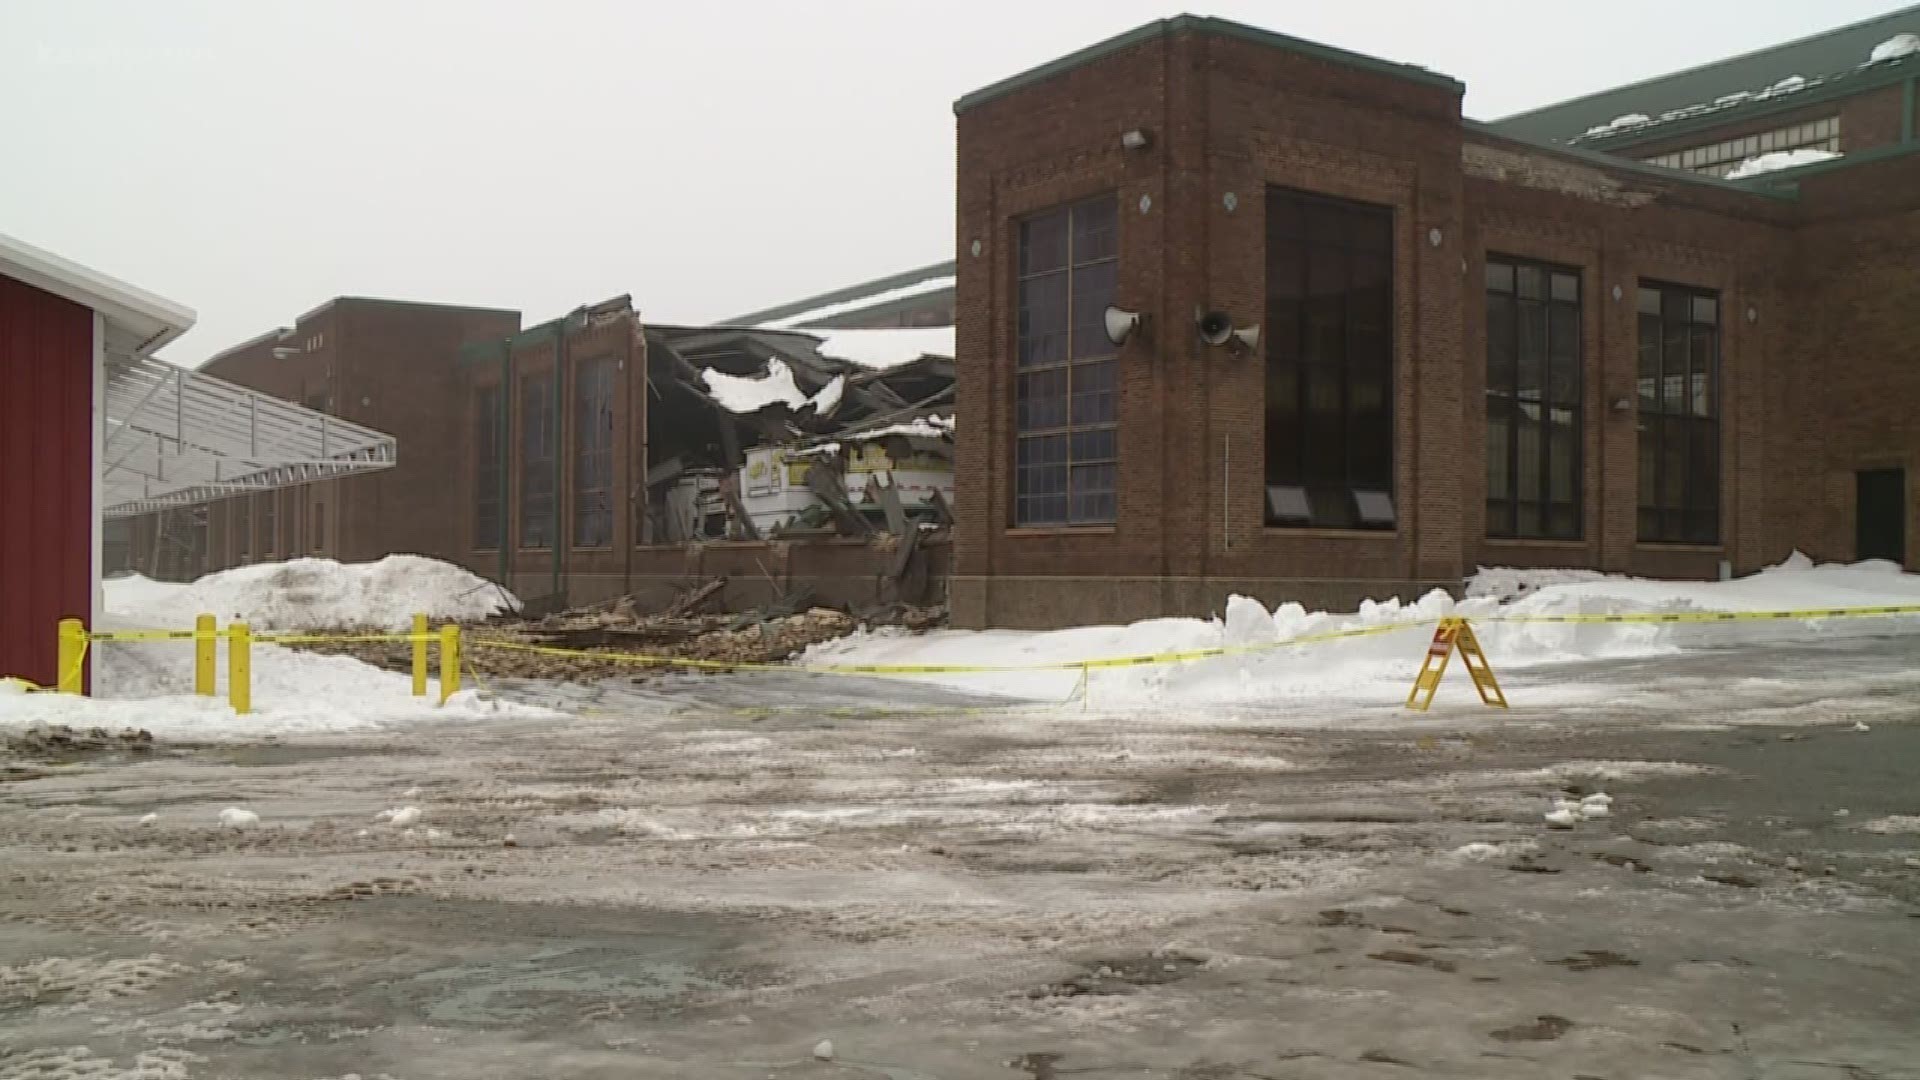 Thousands of pounds of snow came crashing down Tuesday due to a unique roofing design at Cattle Barn.